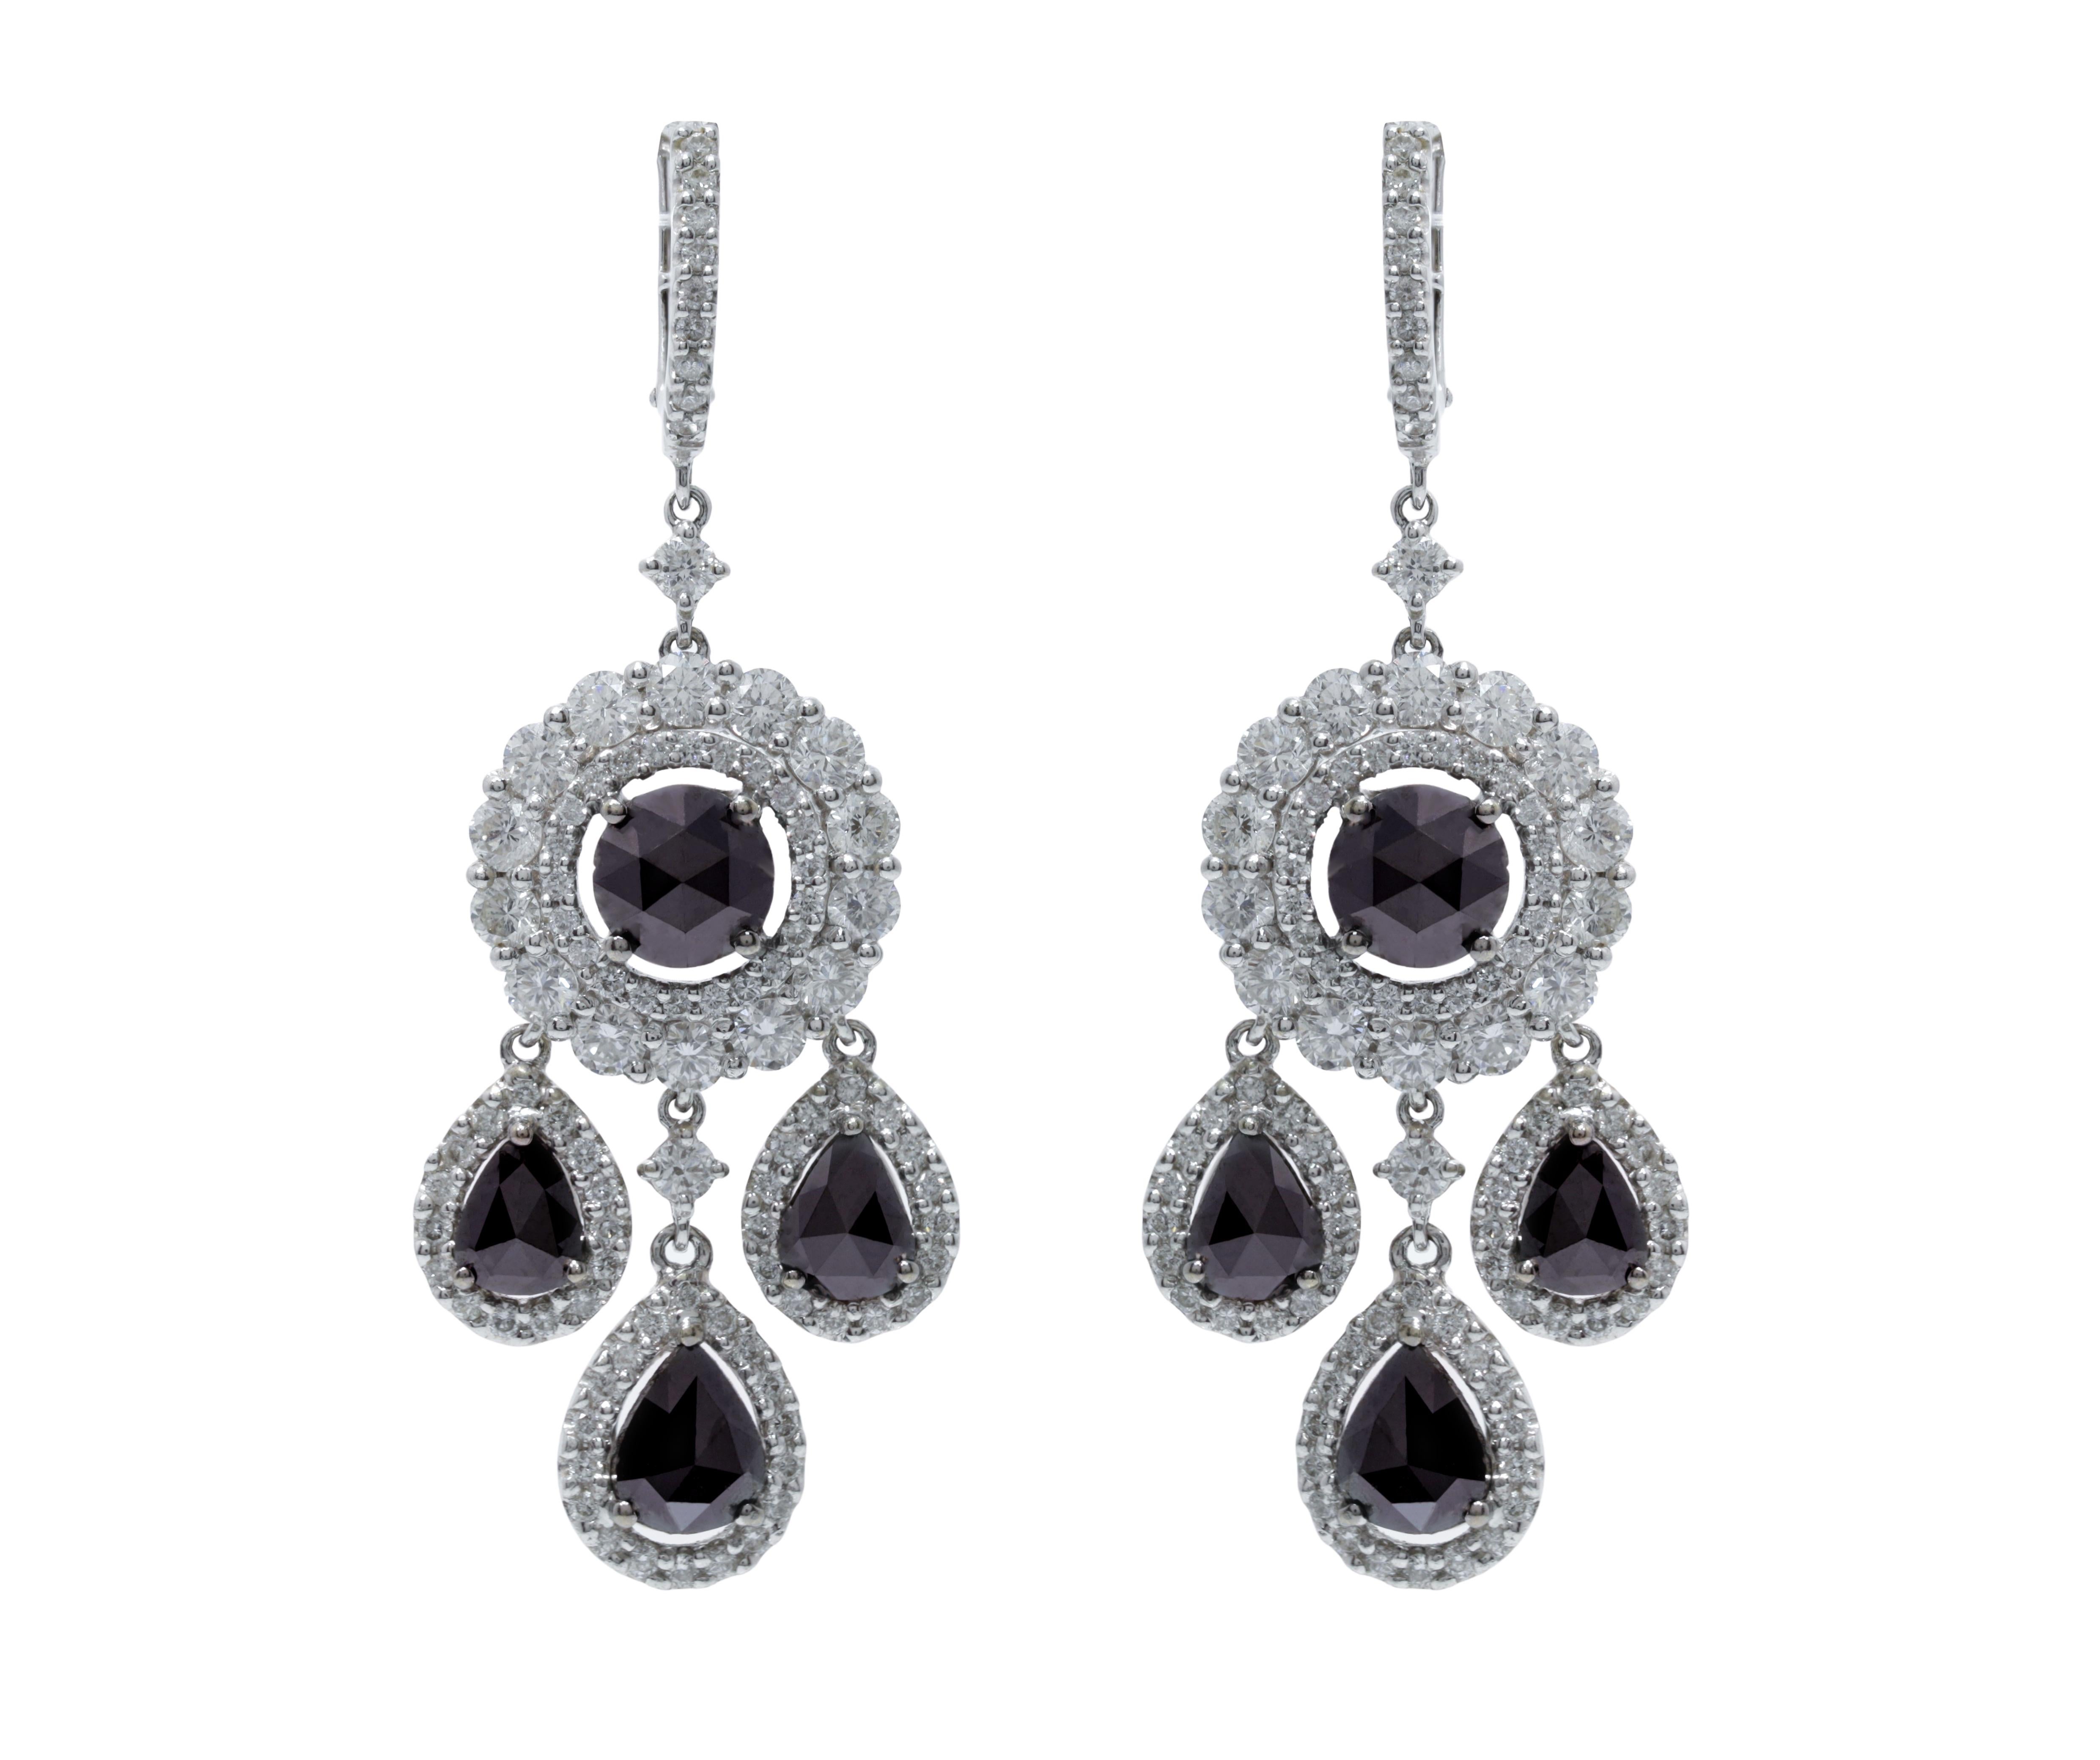 18K White Gold, White and Black Diamond Earrings Features 7.20cts. Of Diamonds
